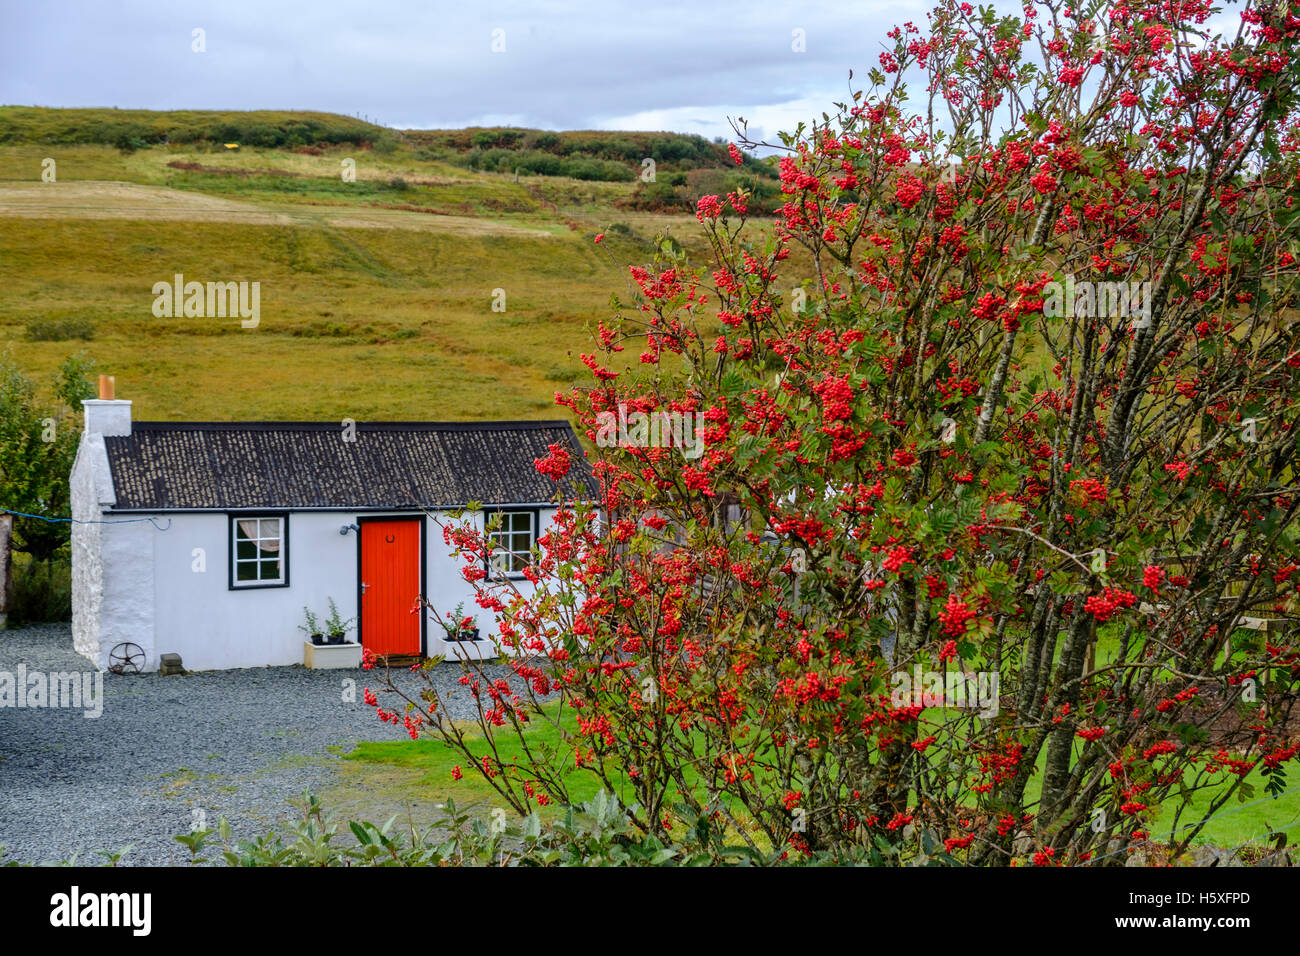 Typical Beautiful White Cottage On The Isle Of Skye Scotland With